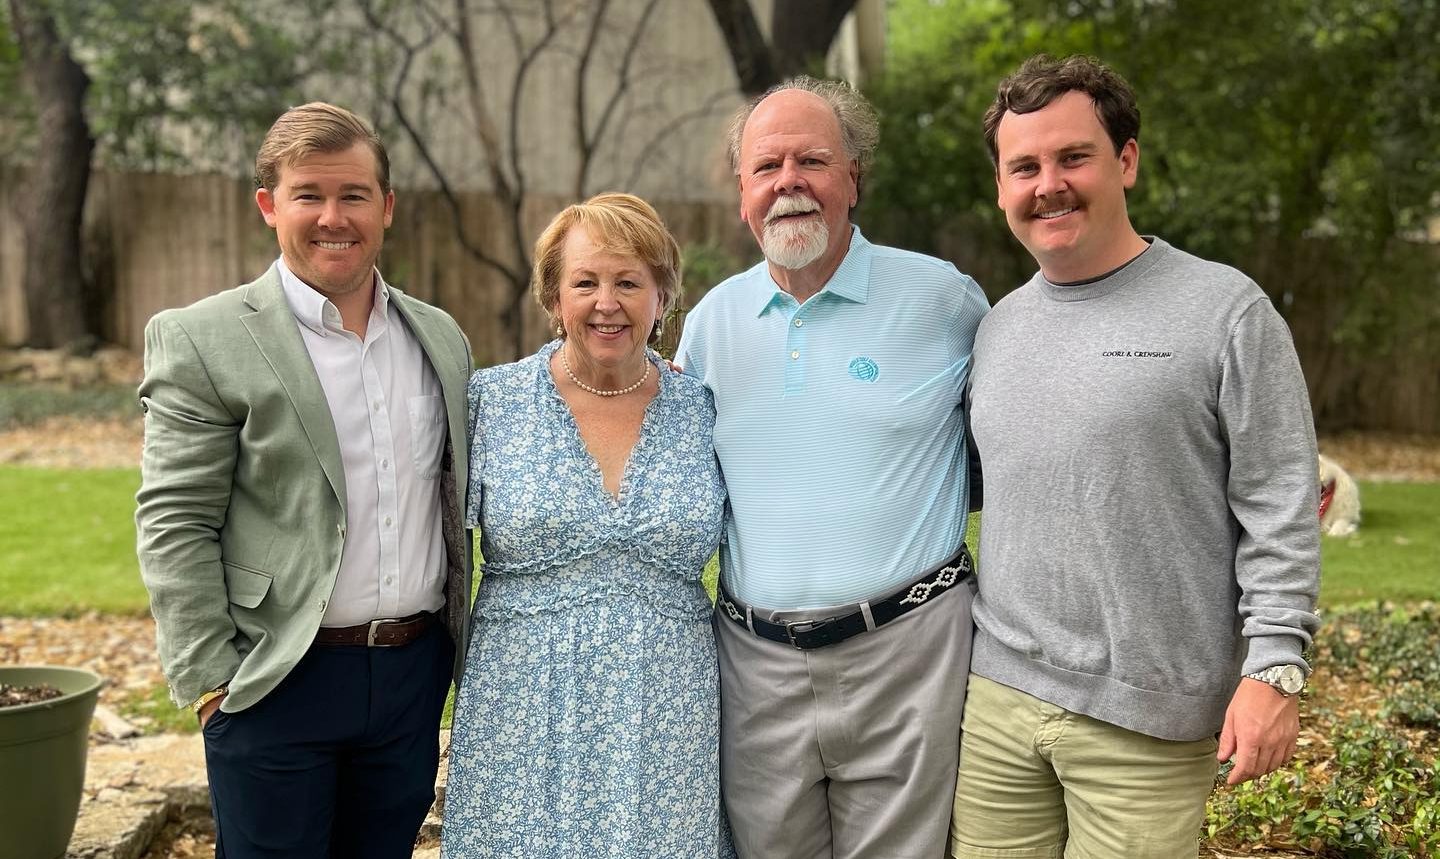 The Clements family. Left to right: Ferris, Betsy, Ed, and Ben Clements